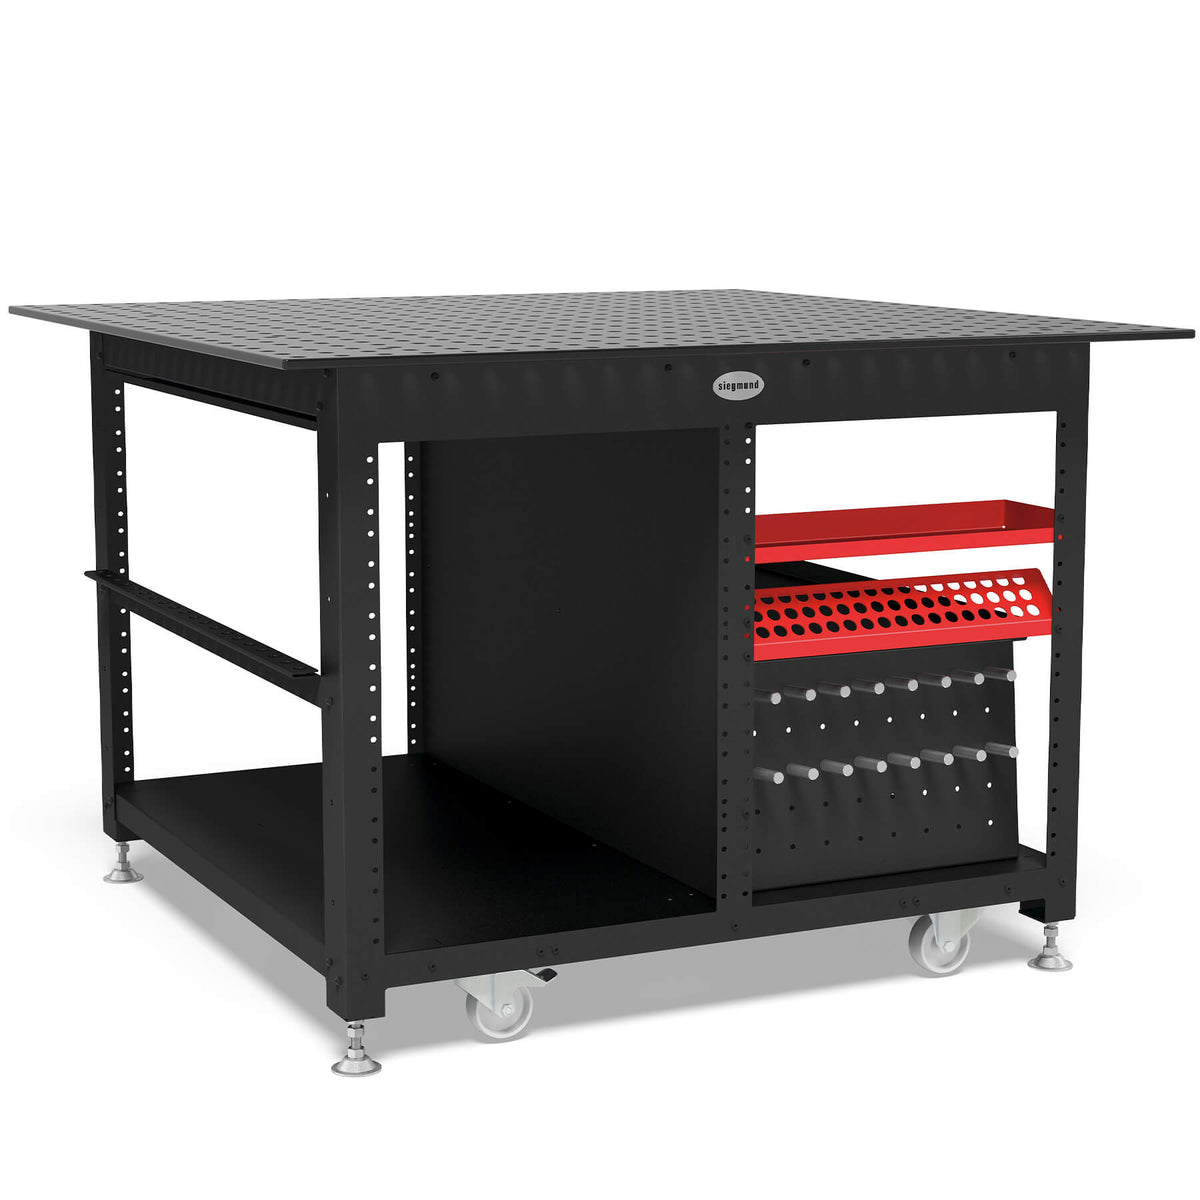 US164601: System 16 Workstation Including 4'x4' (48"x48") Perforated Plate with Shelves (Siegmund Imperial Series)